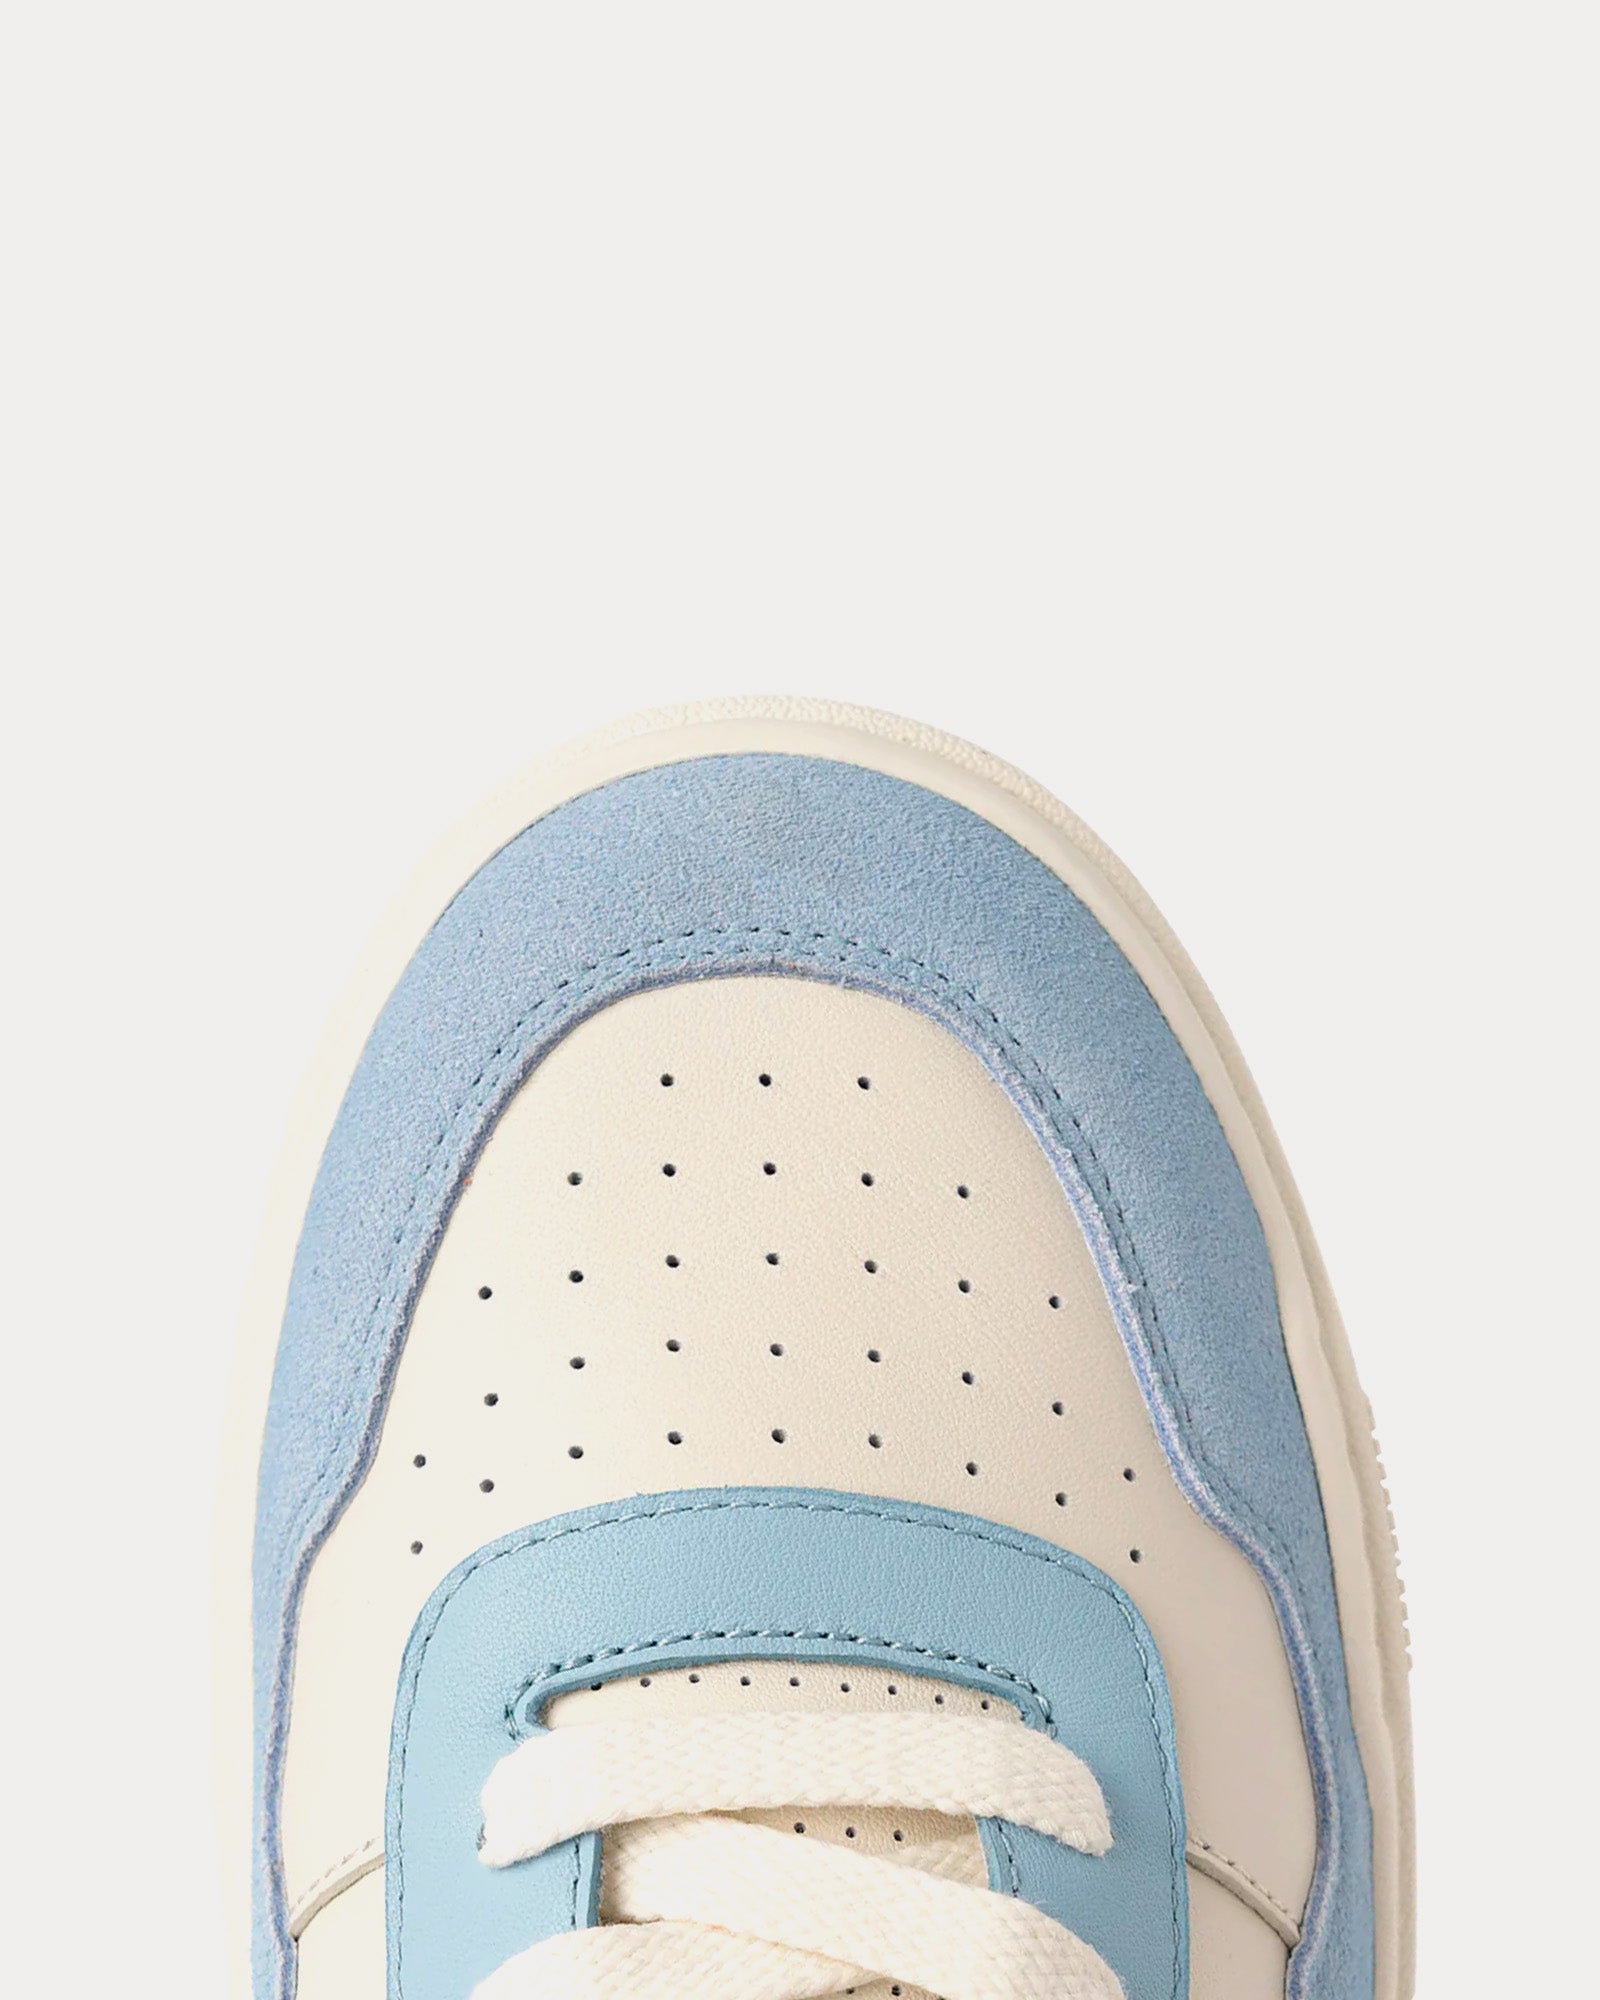 Foot Industry - 90's The Plateau Off-White / Light Blue Low Top Sneakers